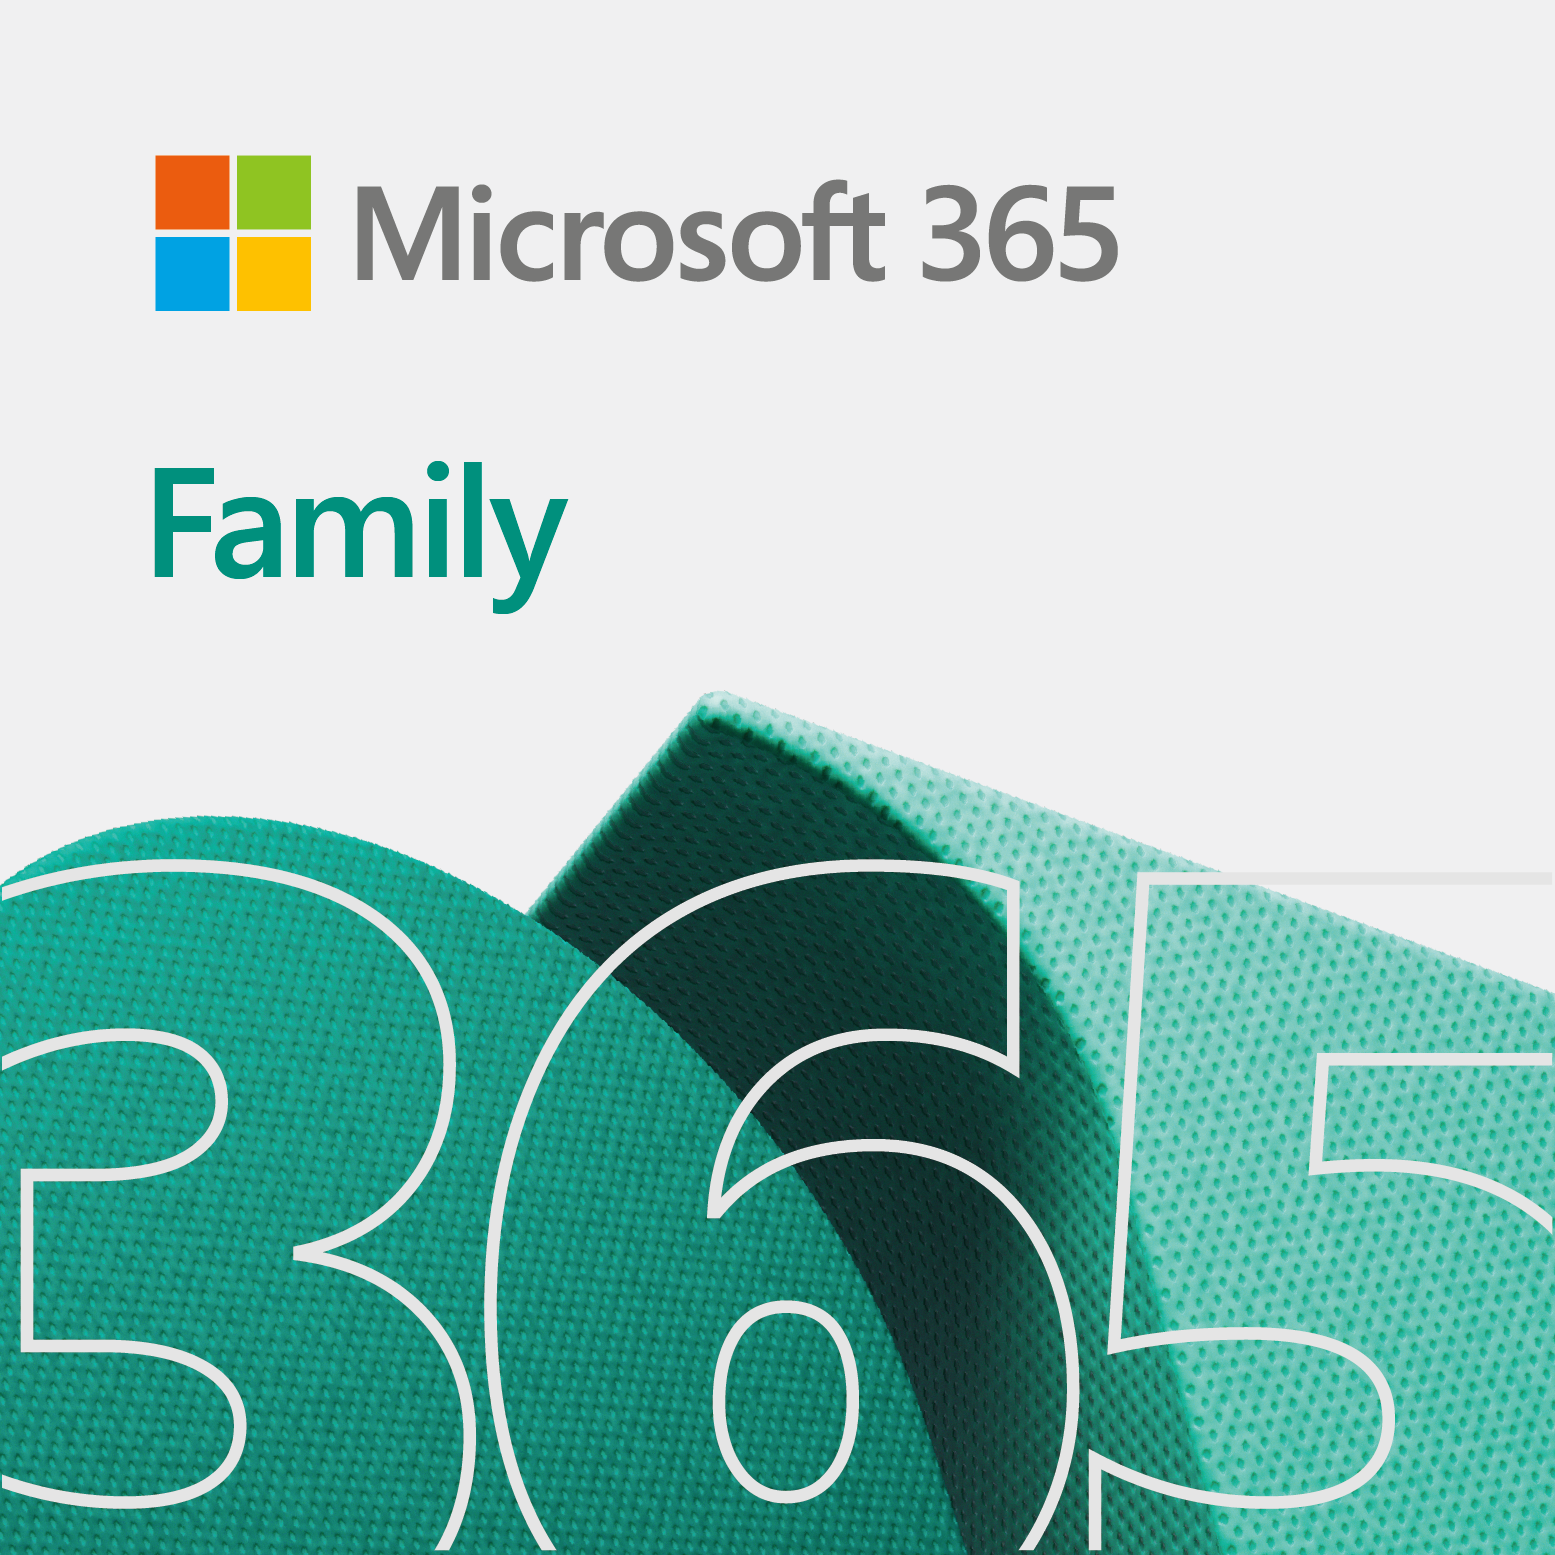 Buy Microsoft 365 Family (Formerly Office 365) - Subscription Price,  Download | Microsoft Store